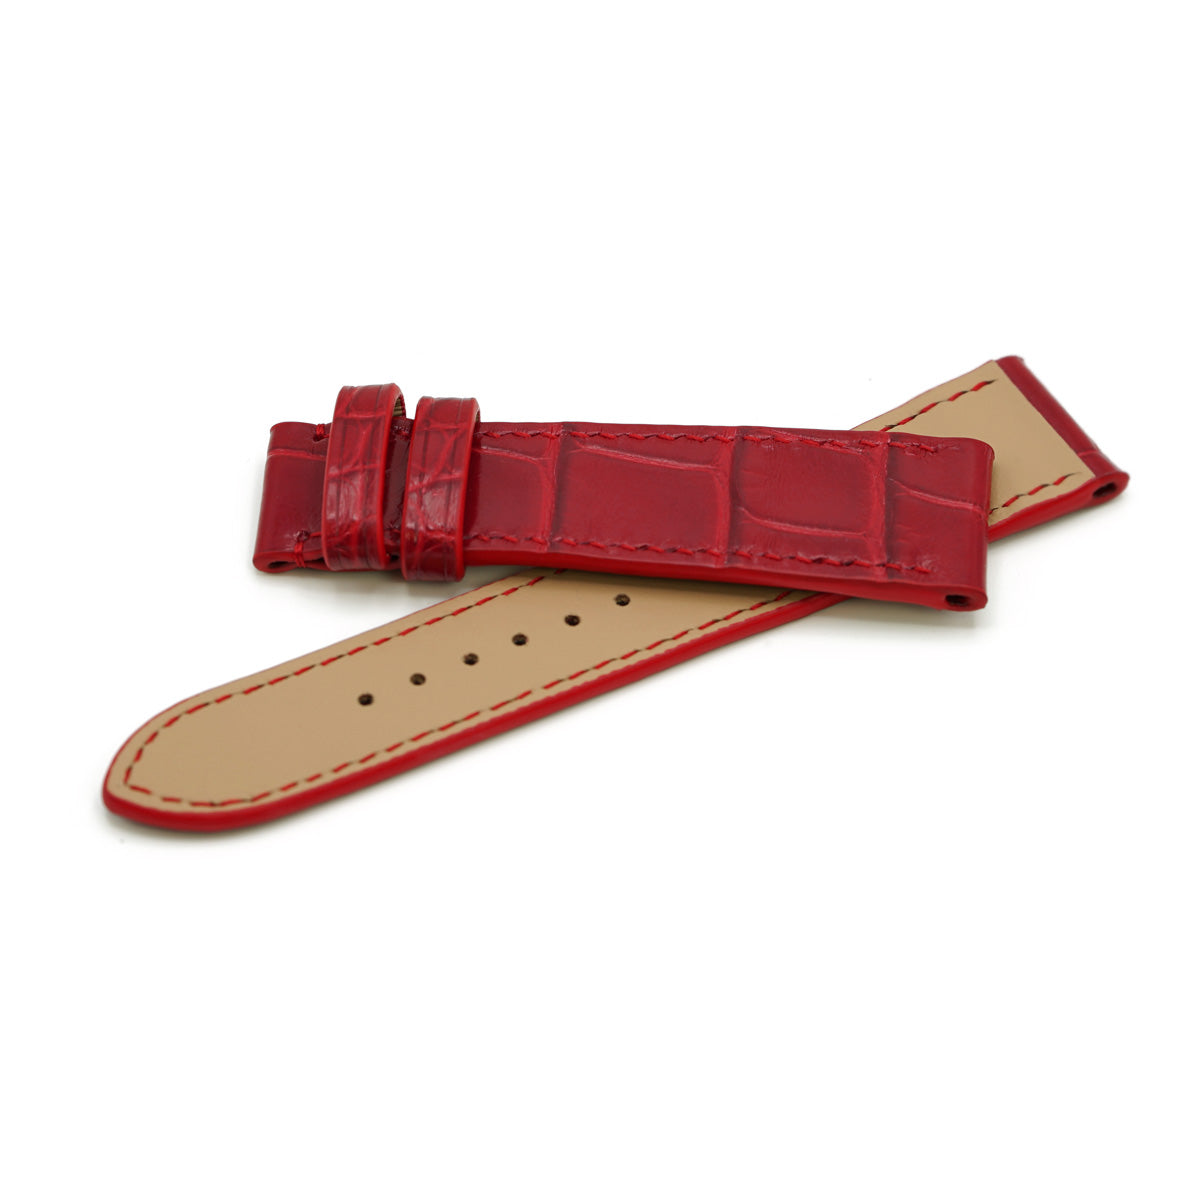 Glossy Red Square Scales Alligator Leather Watch Strap, Hand Stitched